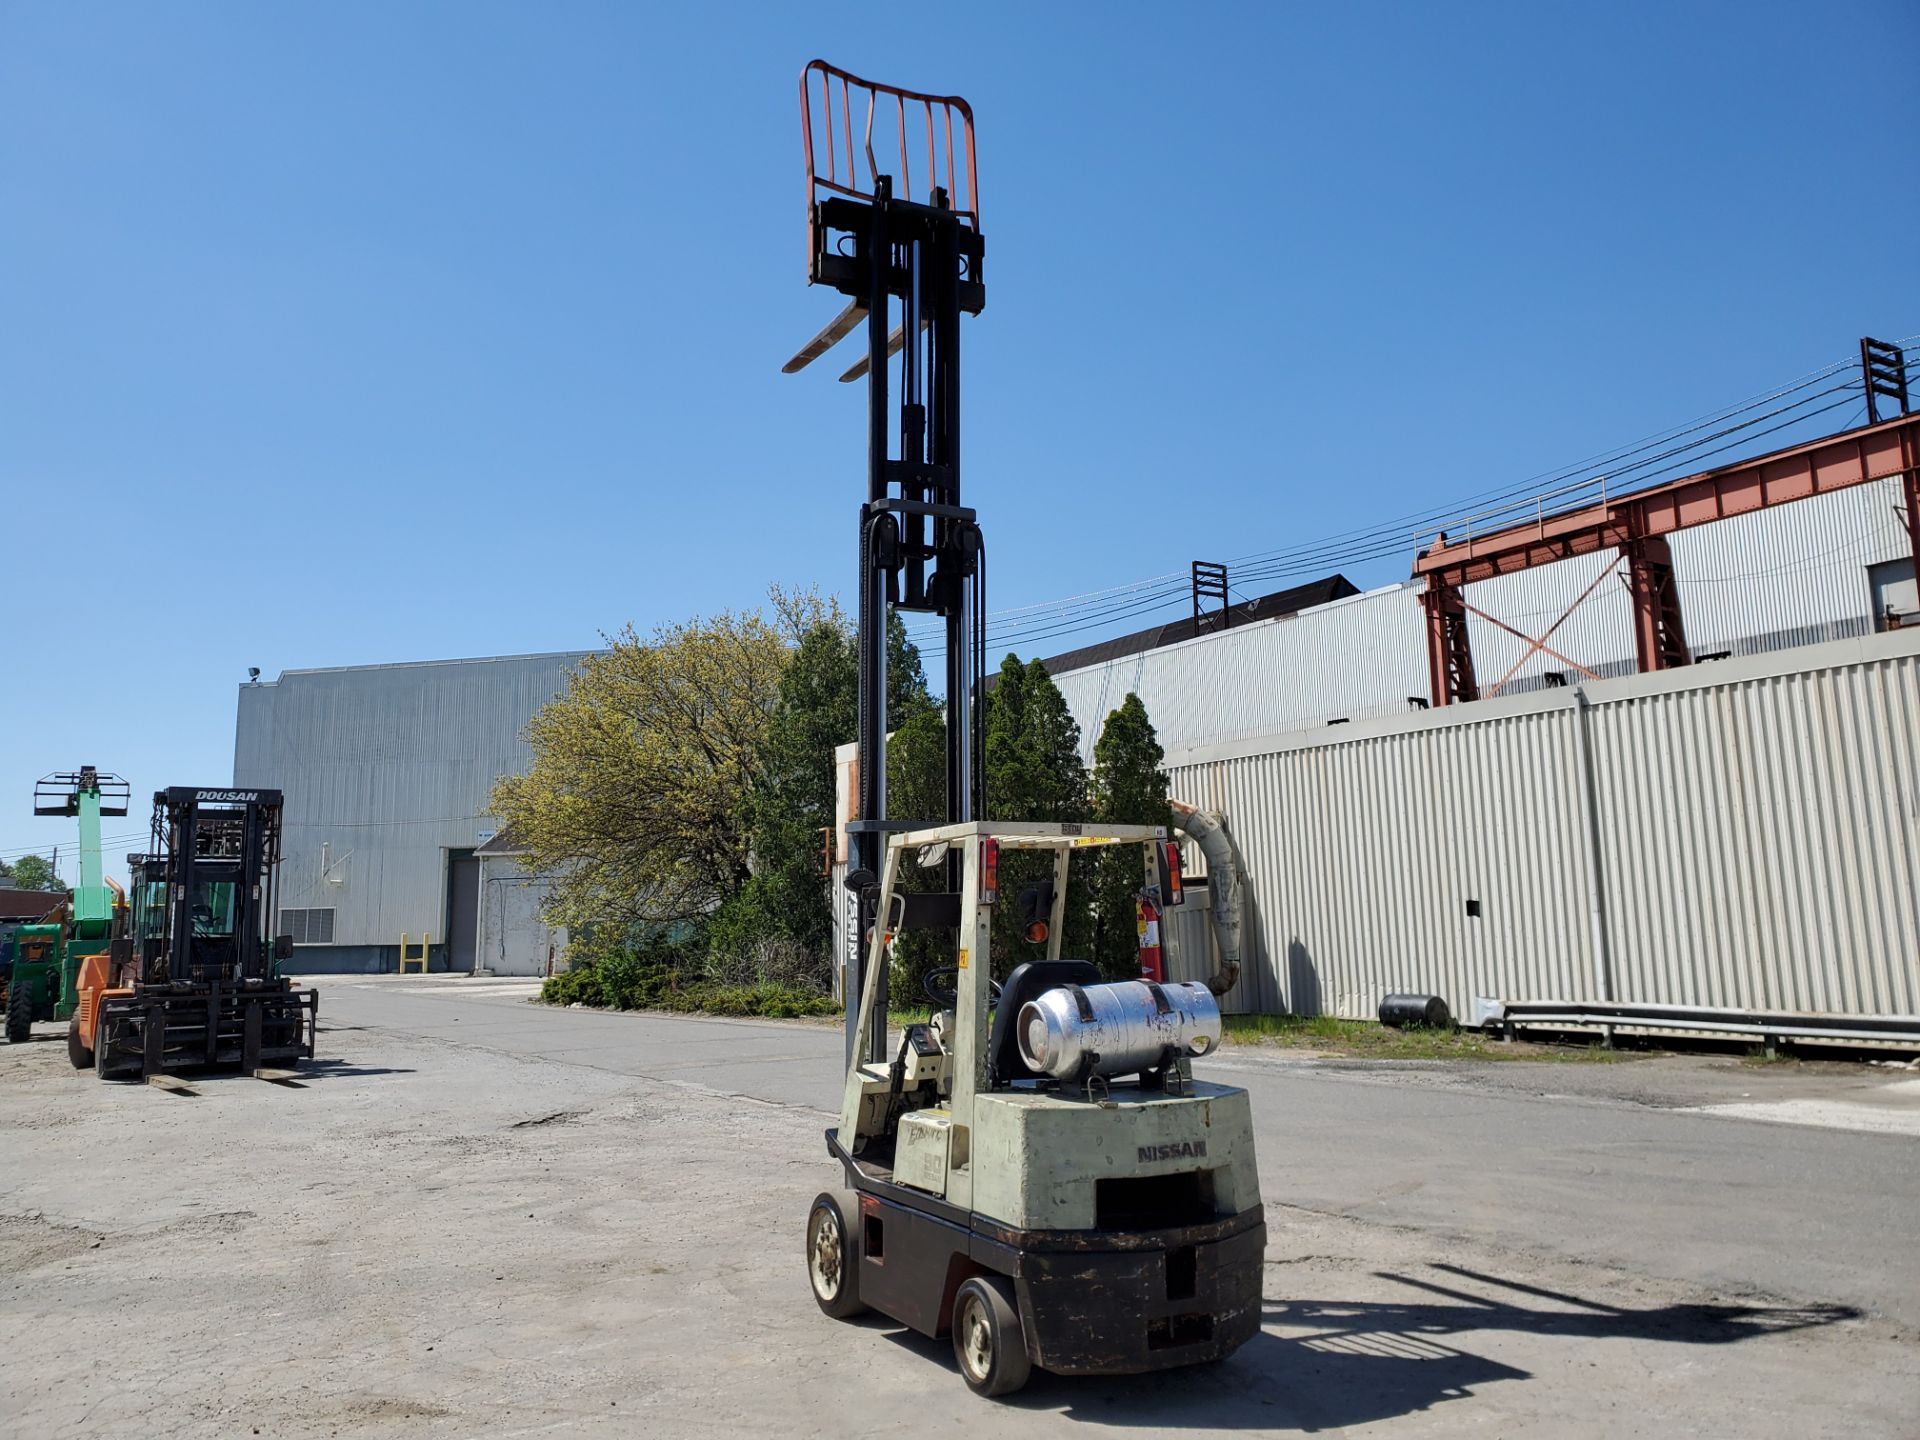 Nissan KCPH02A25PV 4,400 lb Forklift - Image 8 of 18